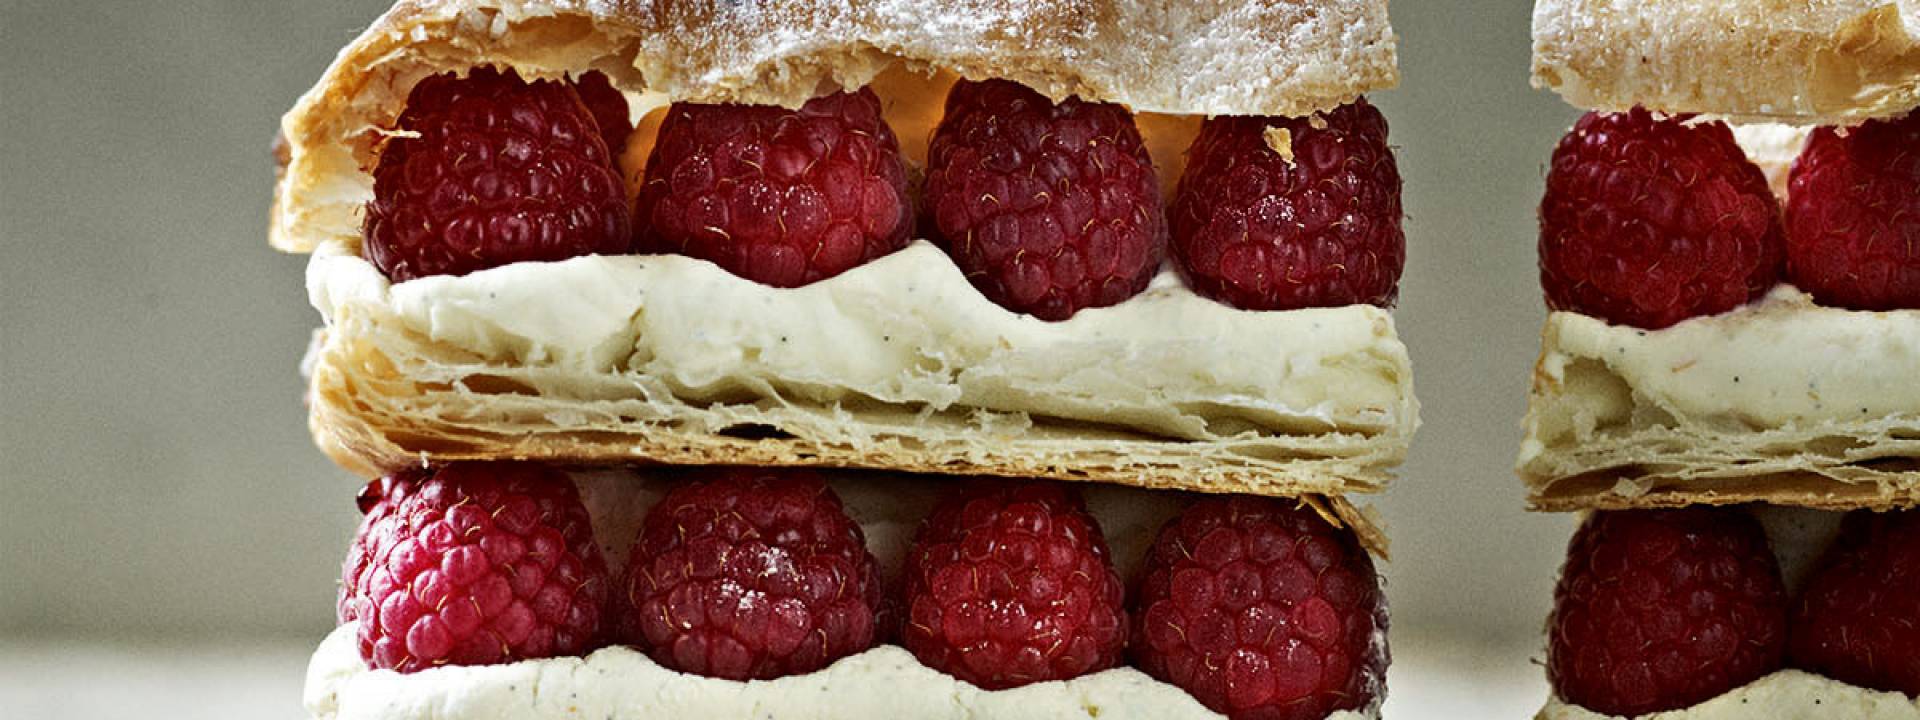 Millefeuille 1710 web